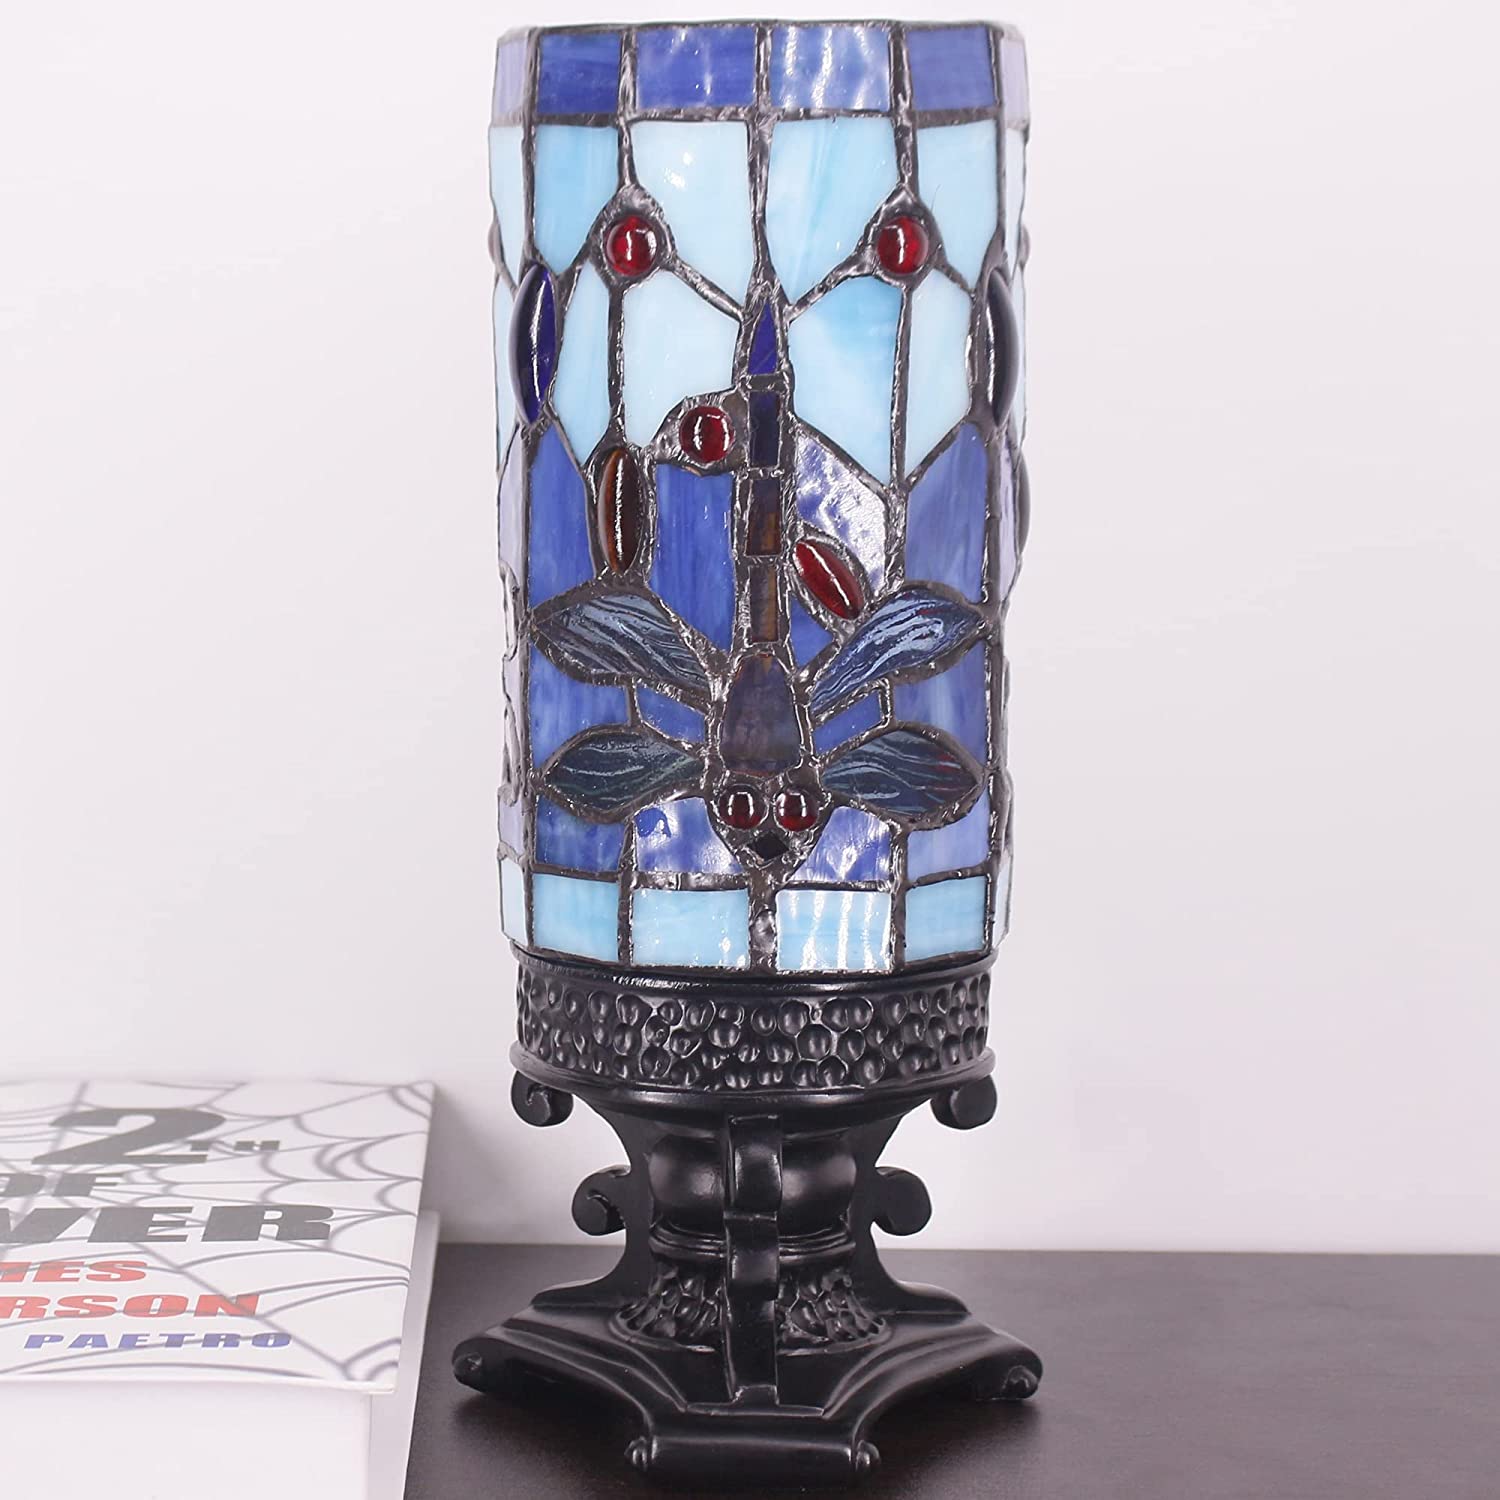 WERFACTORY Small Tiffany Lamp Mini Stained Glass Table Lamp Wide 4 Tall 10 Inch Blue Dragonfly Style Desk Night Light